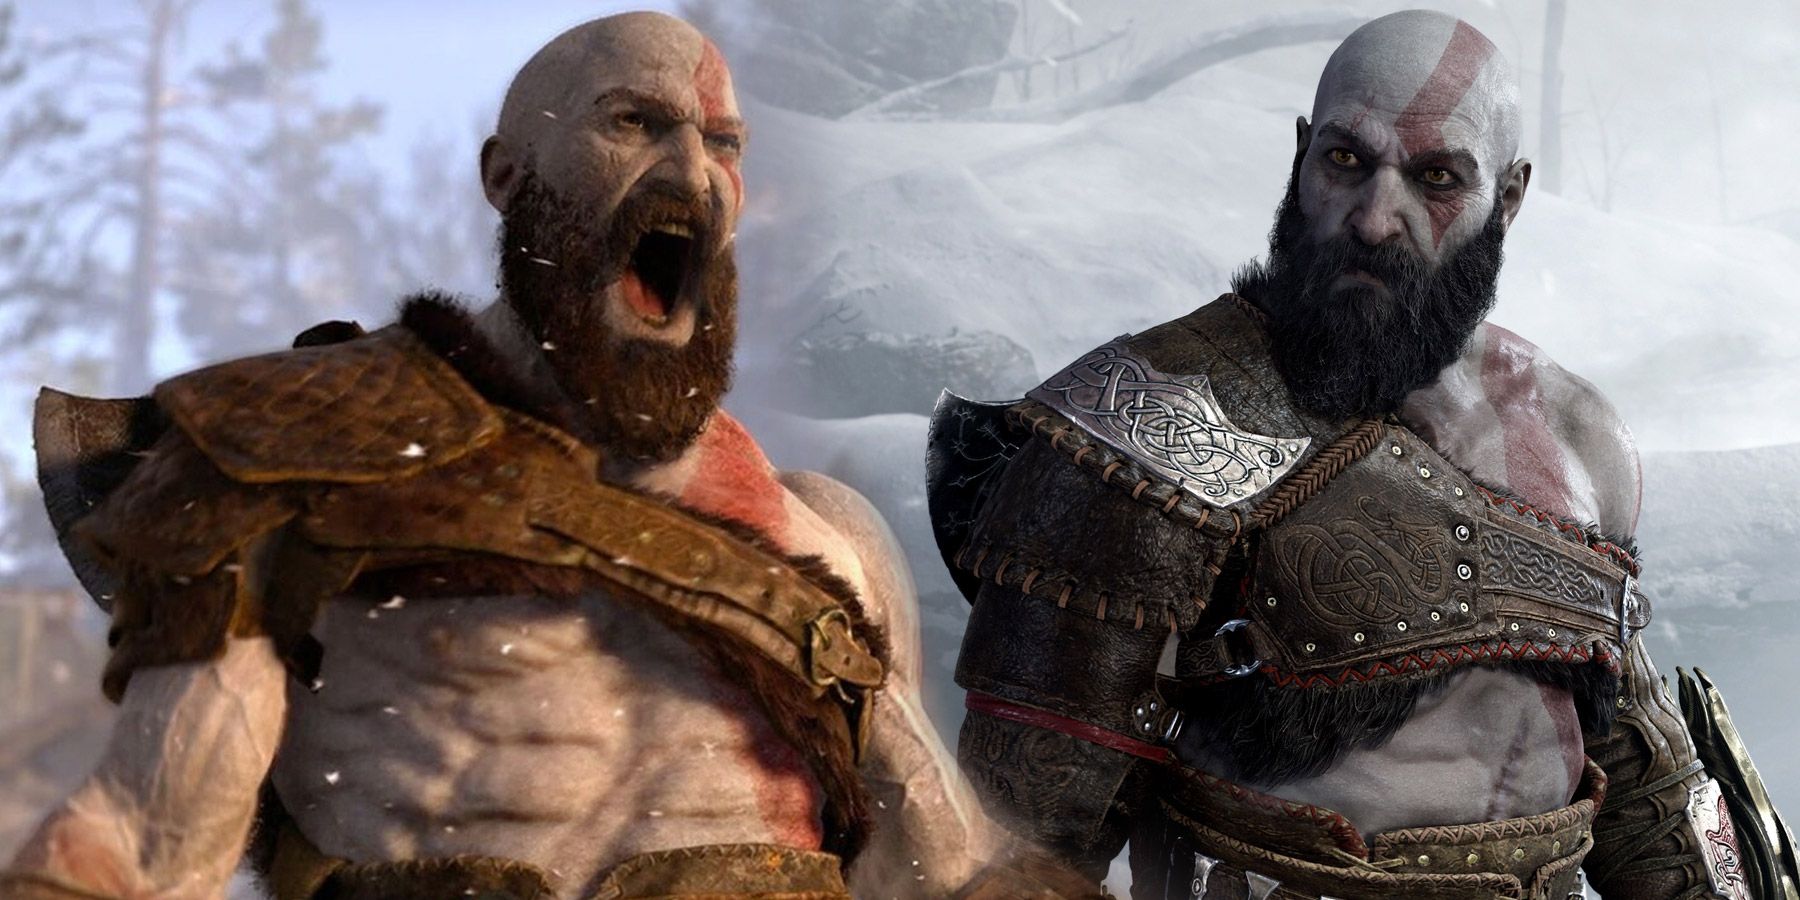 Young kratos would have fought it : r/GodofWar